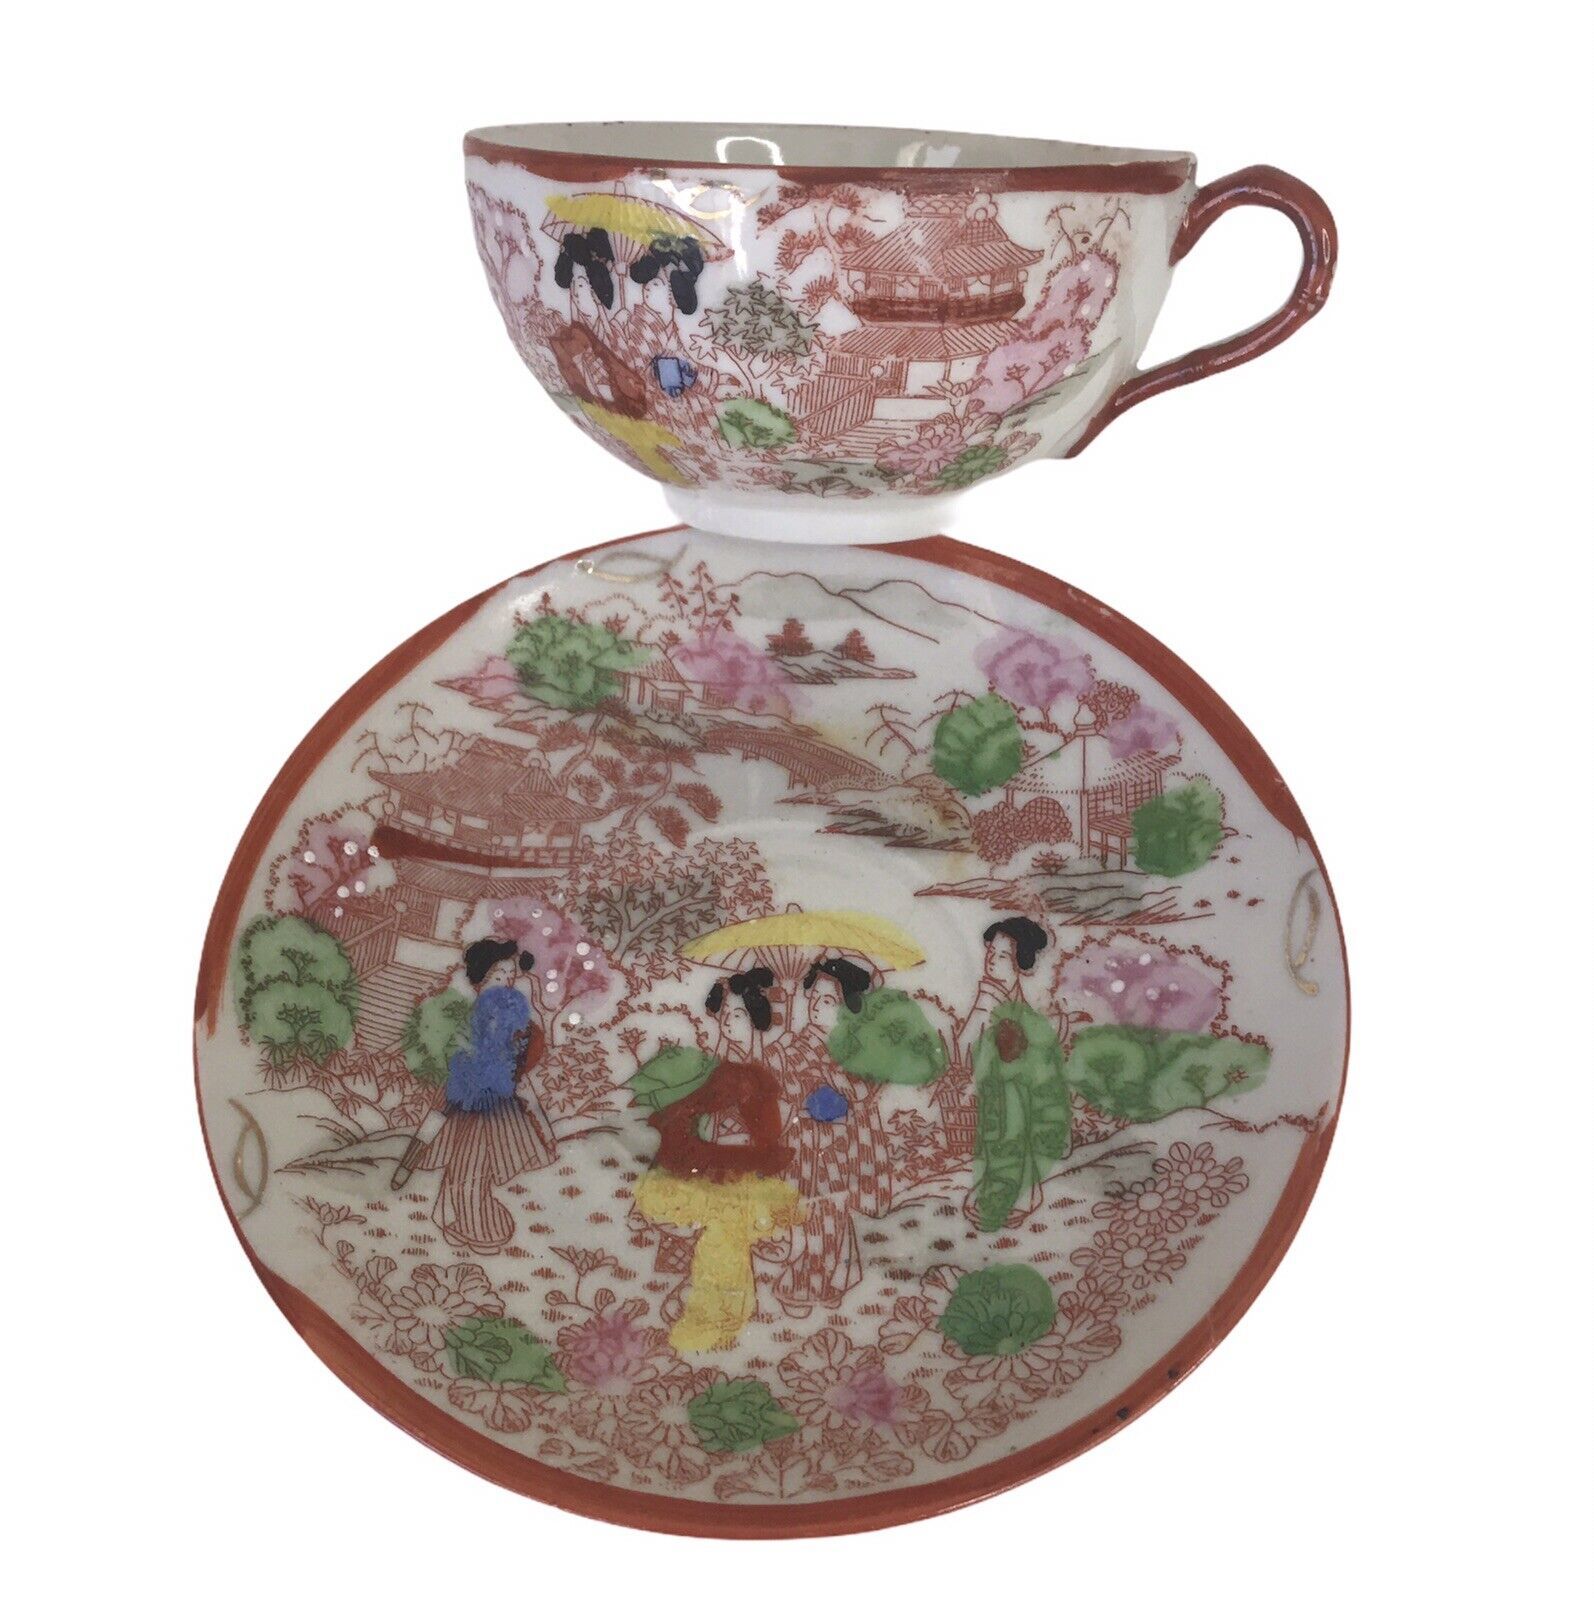 Primary image for Vintage Geisha Girls Delicate Bone China Tea Cup Saucer Set Hand Painted Japan 